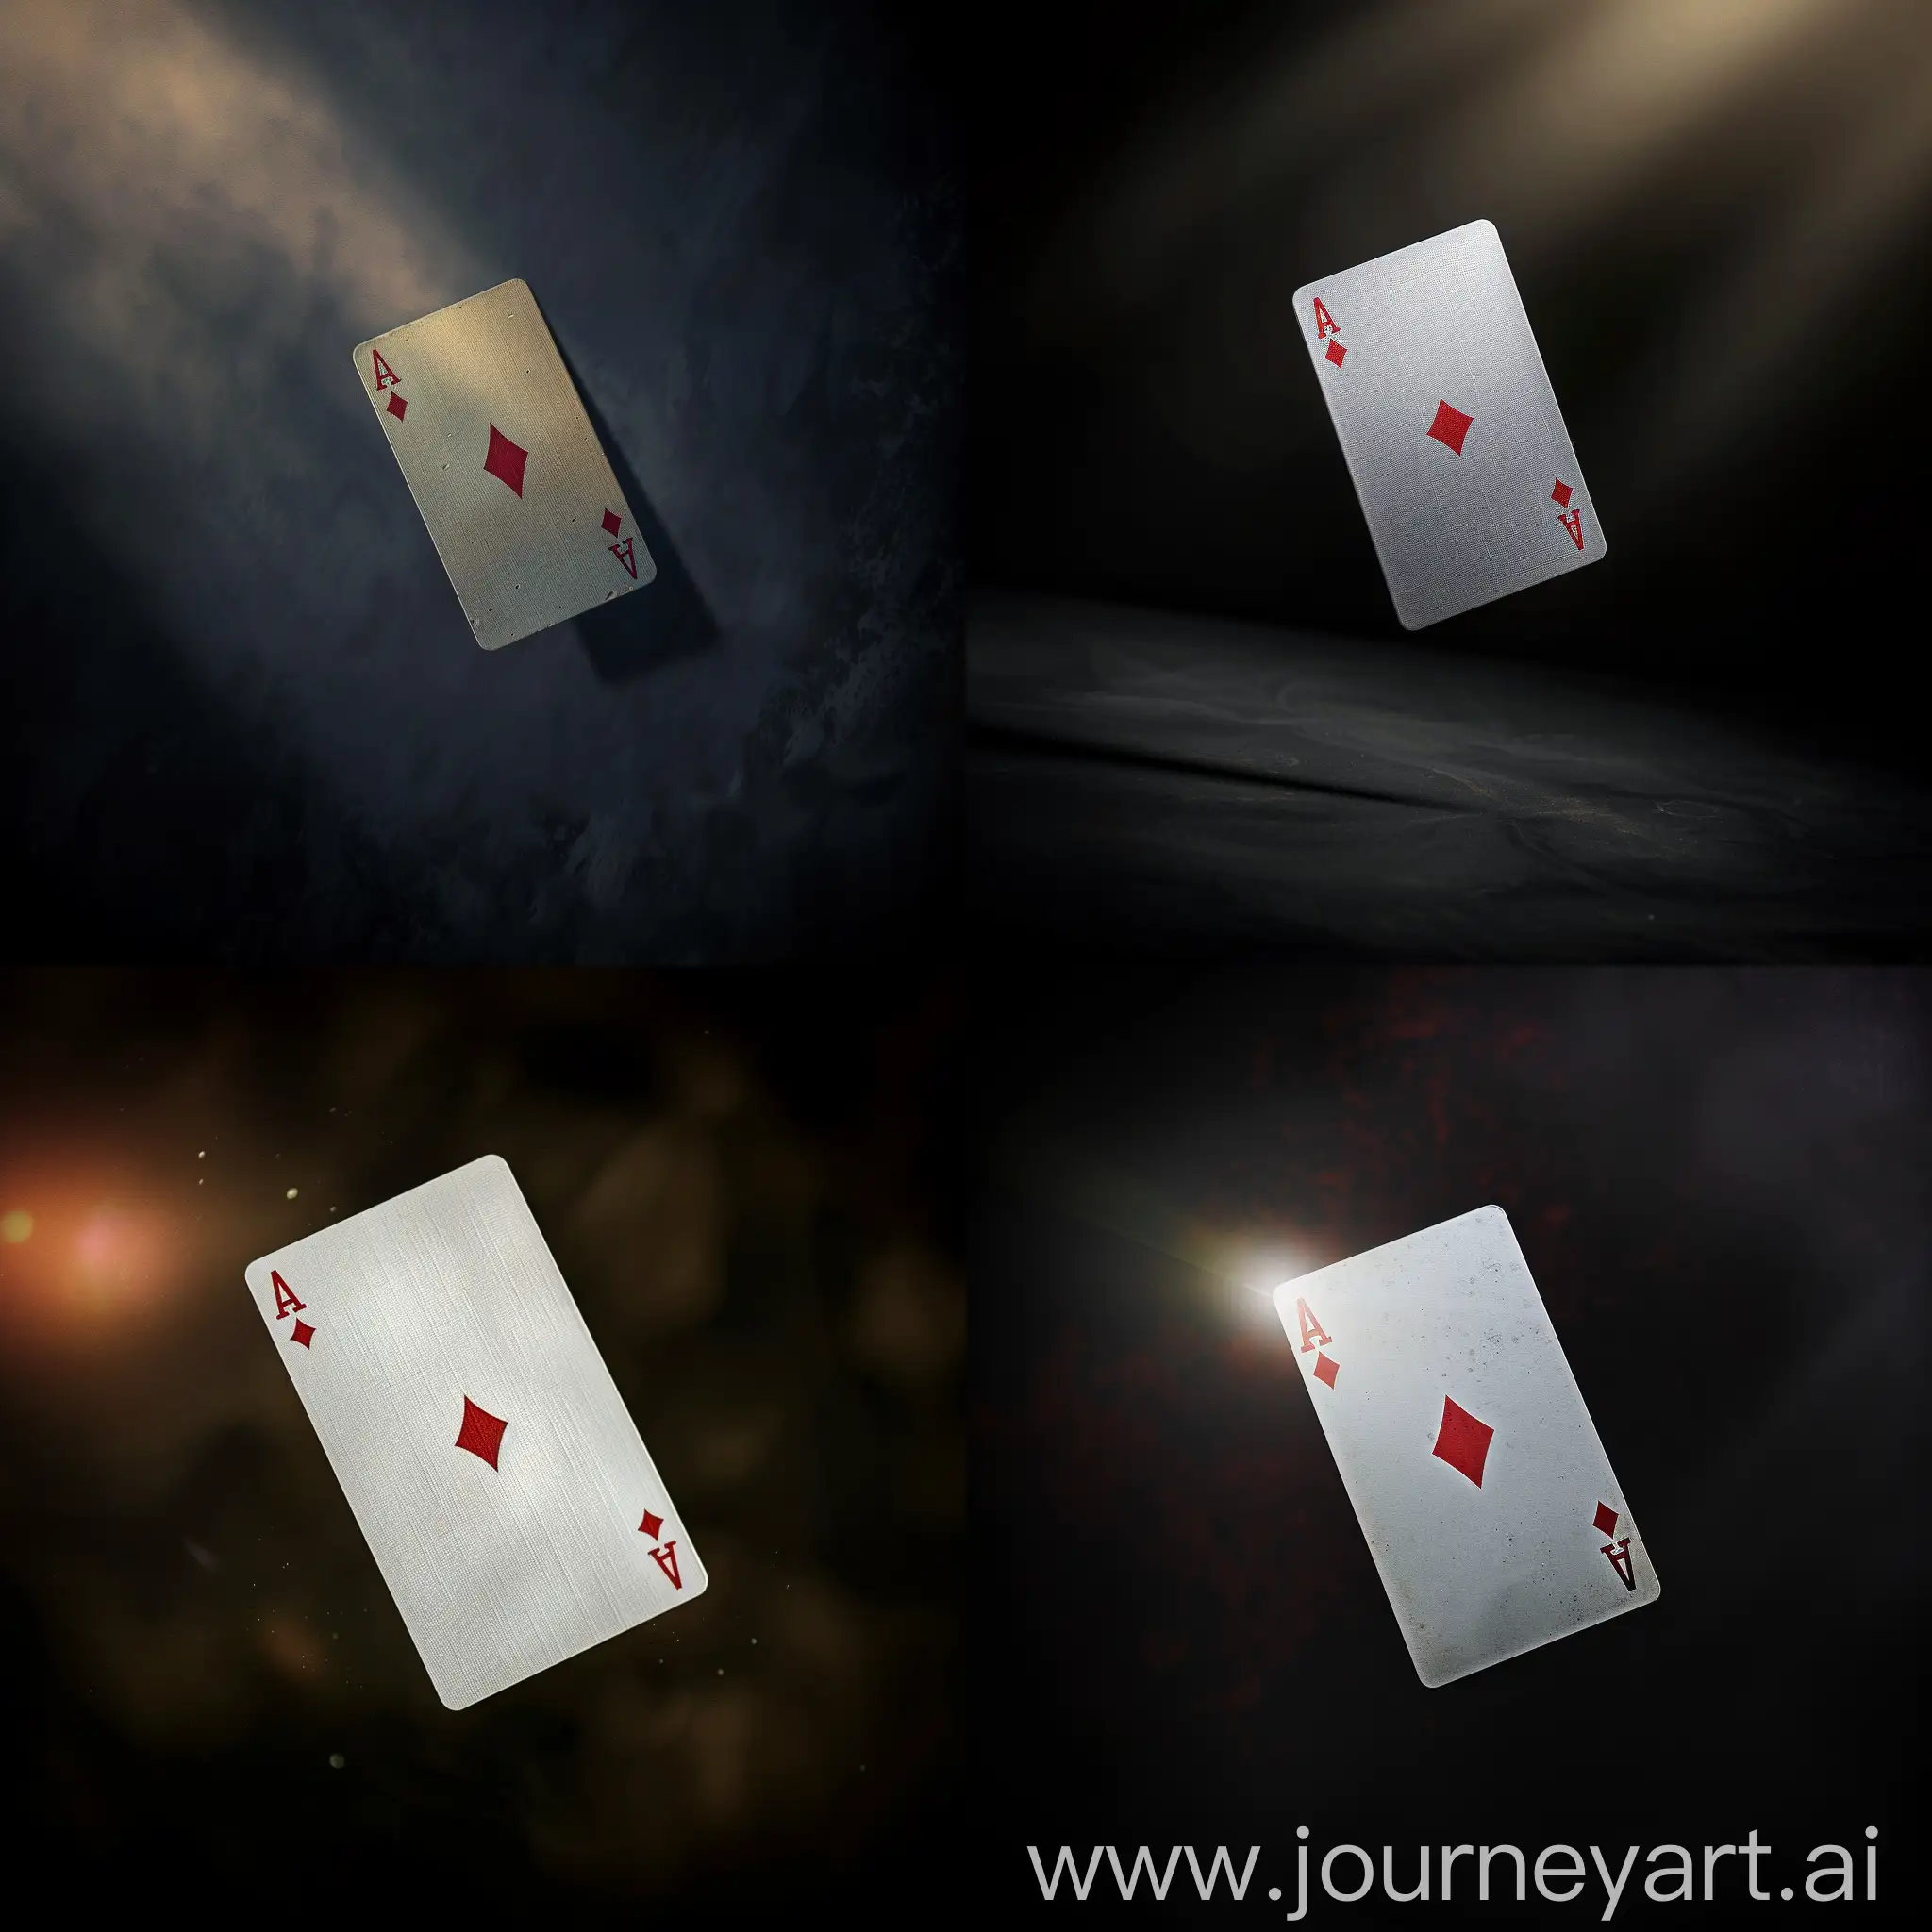 Floating-Playing-Card-in-Dramatic-Black-Room-with-Soft-Left-Light